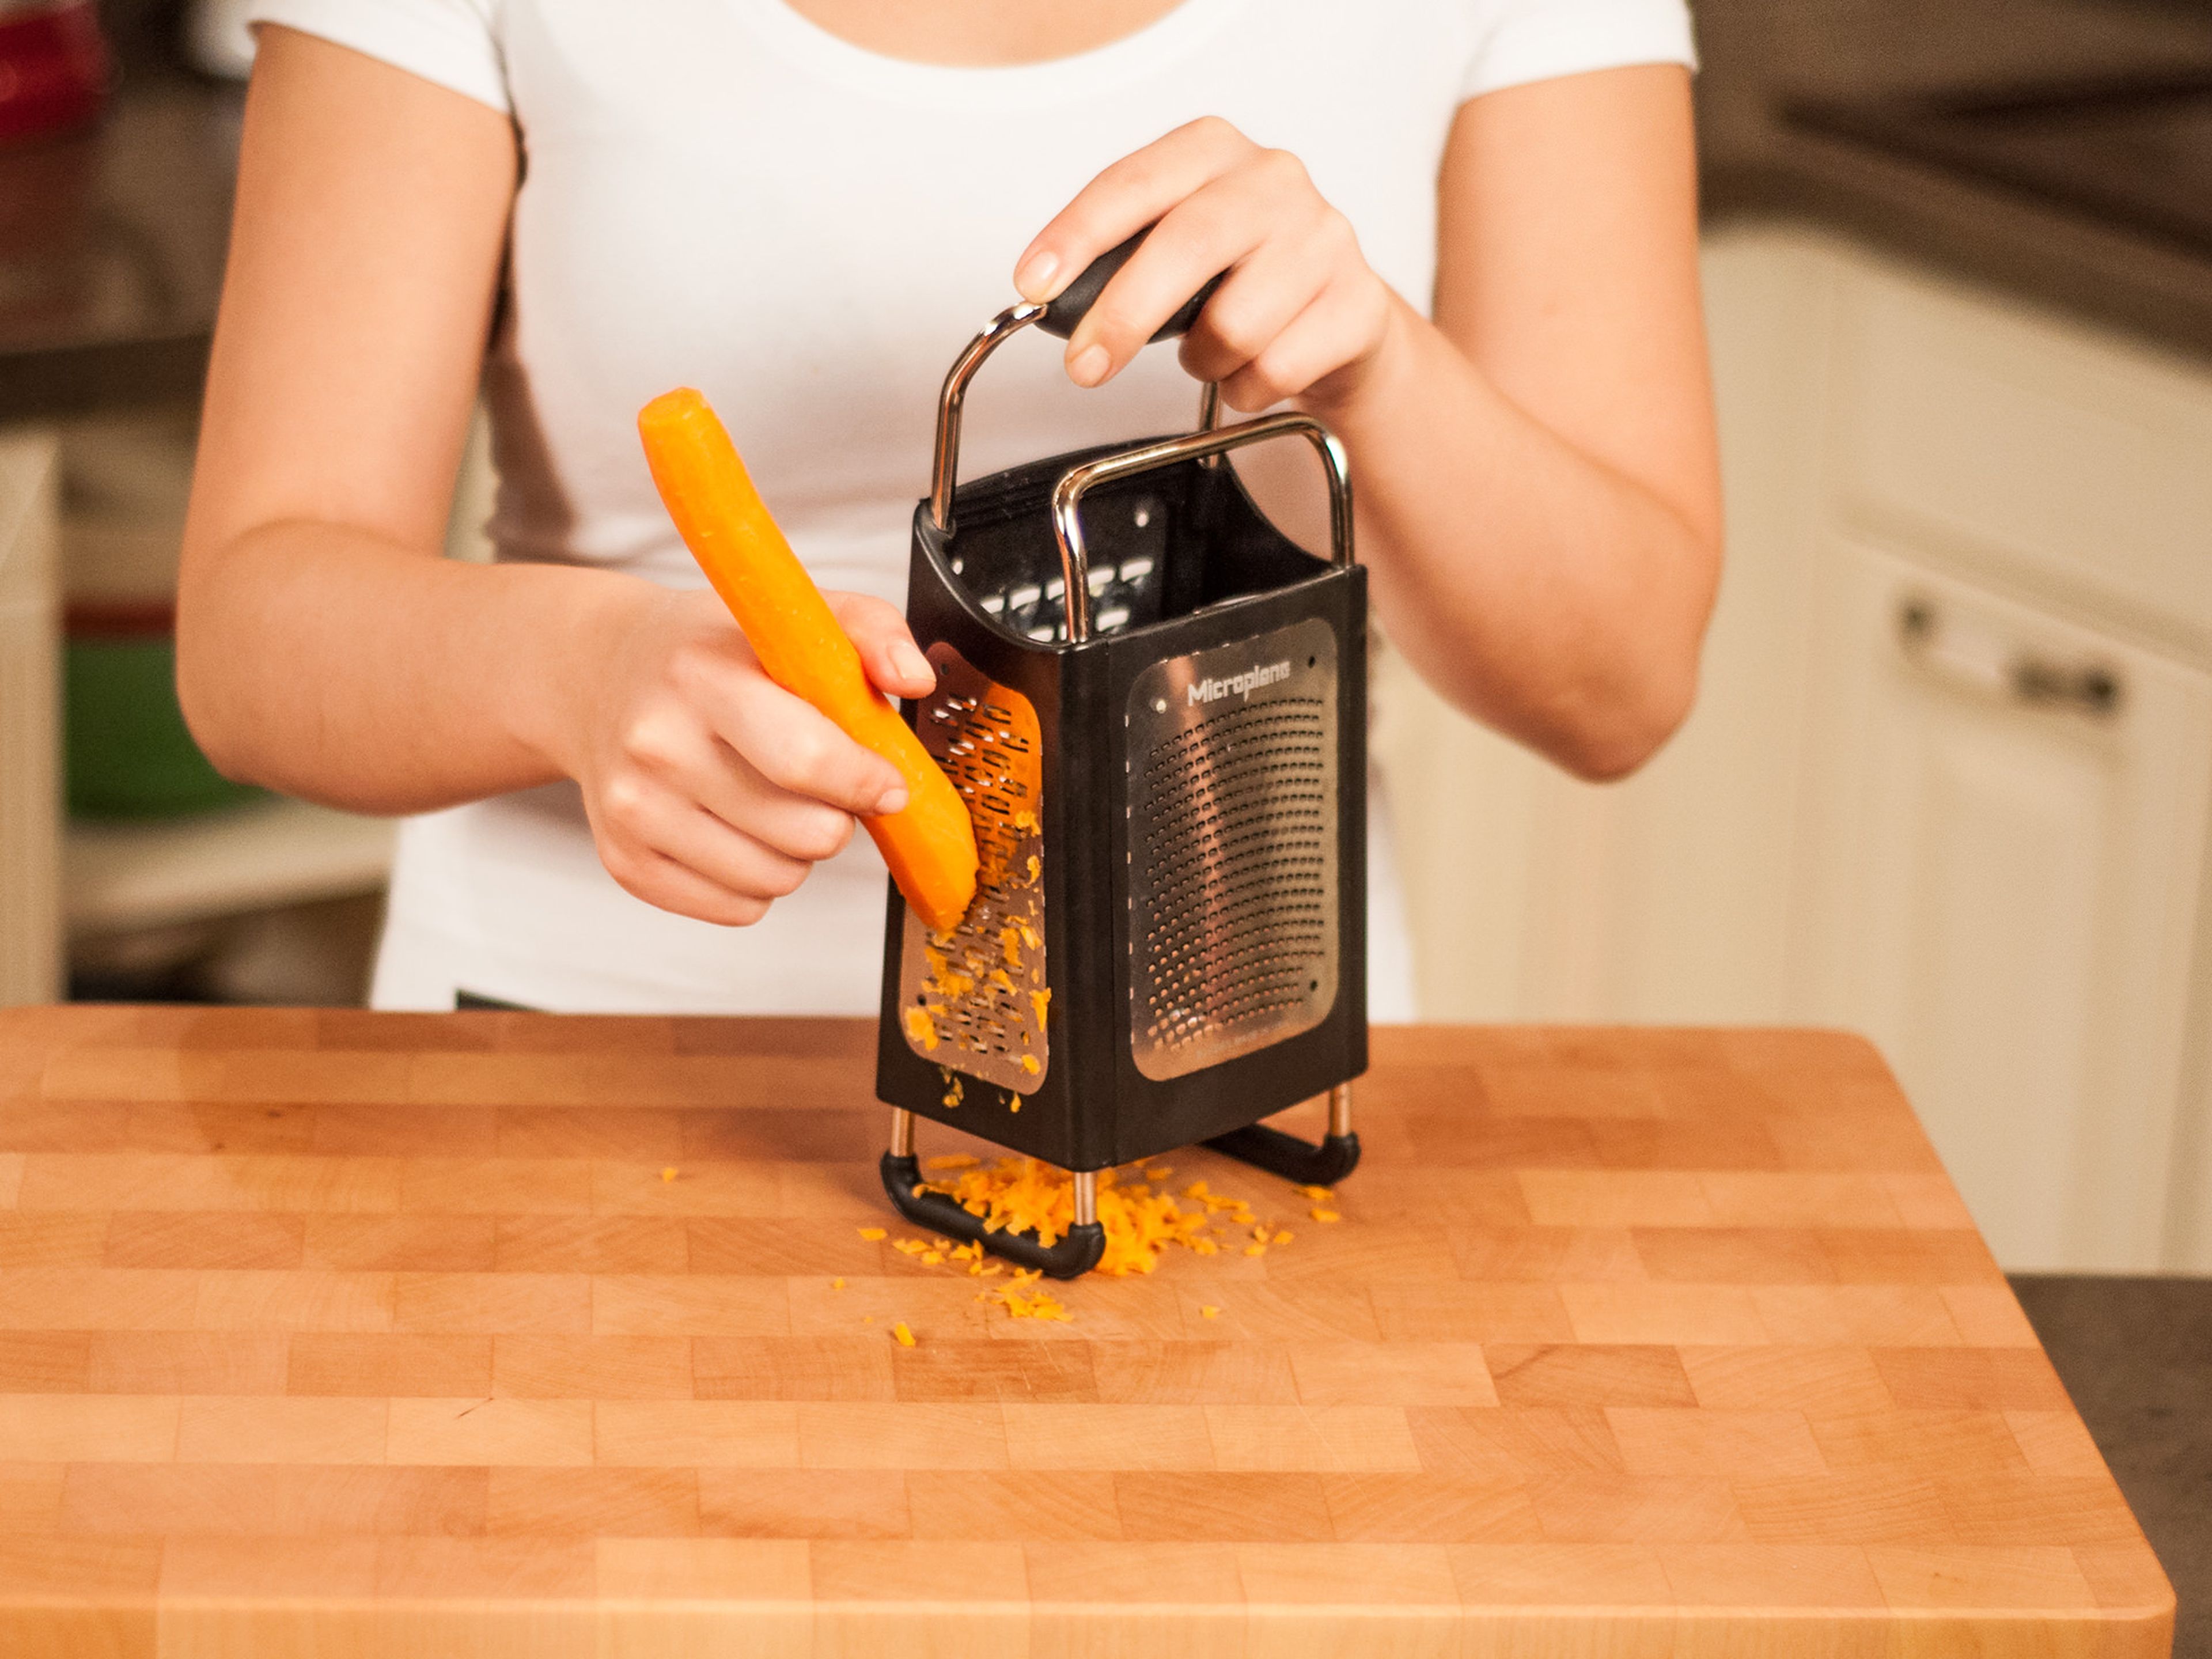 In the meantime, roughly grate carrot using a box grater.